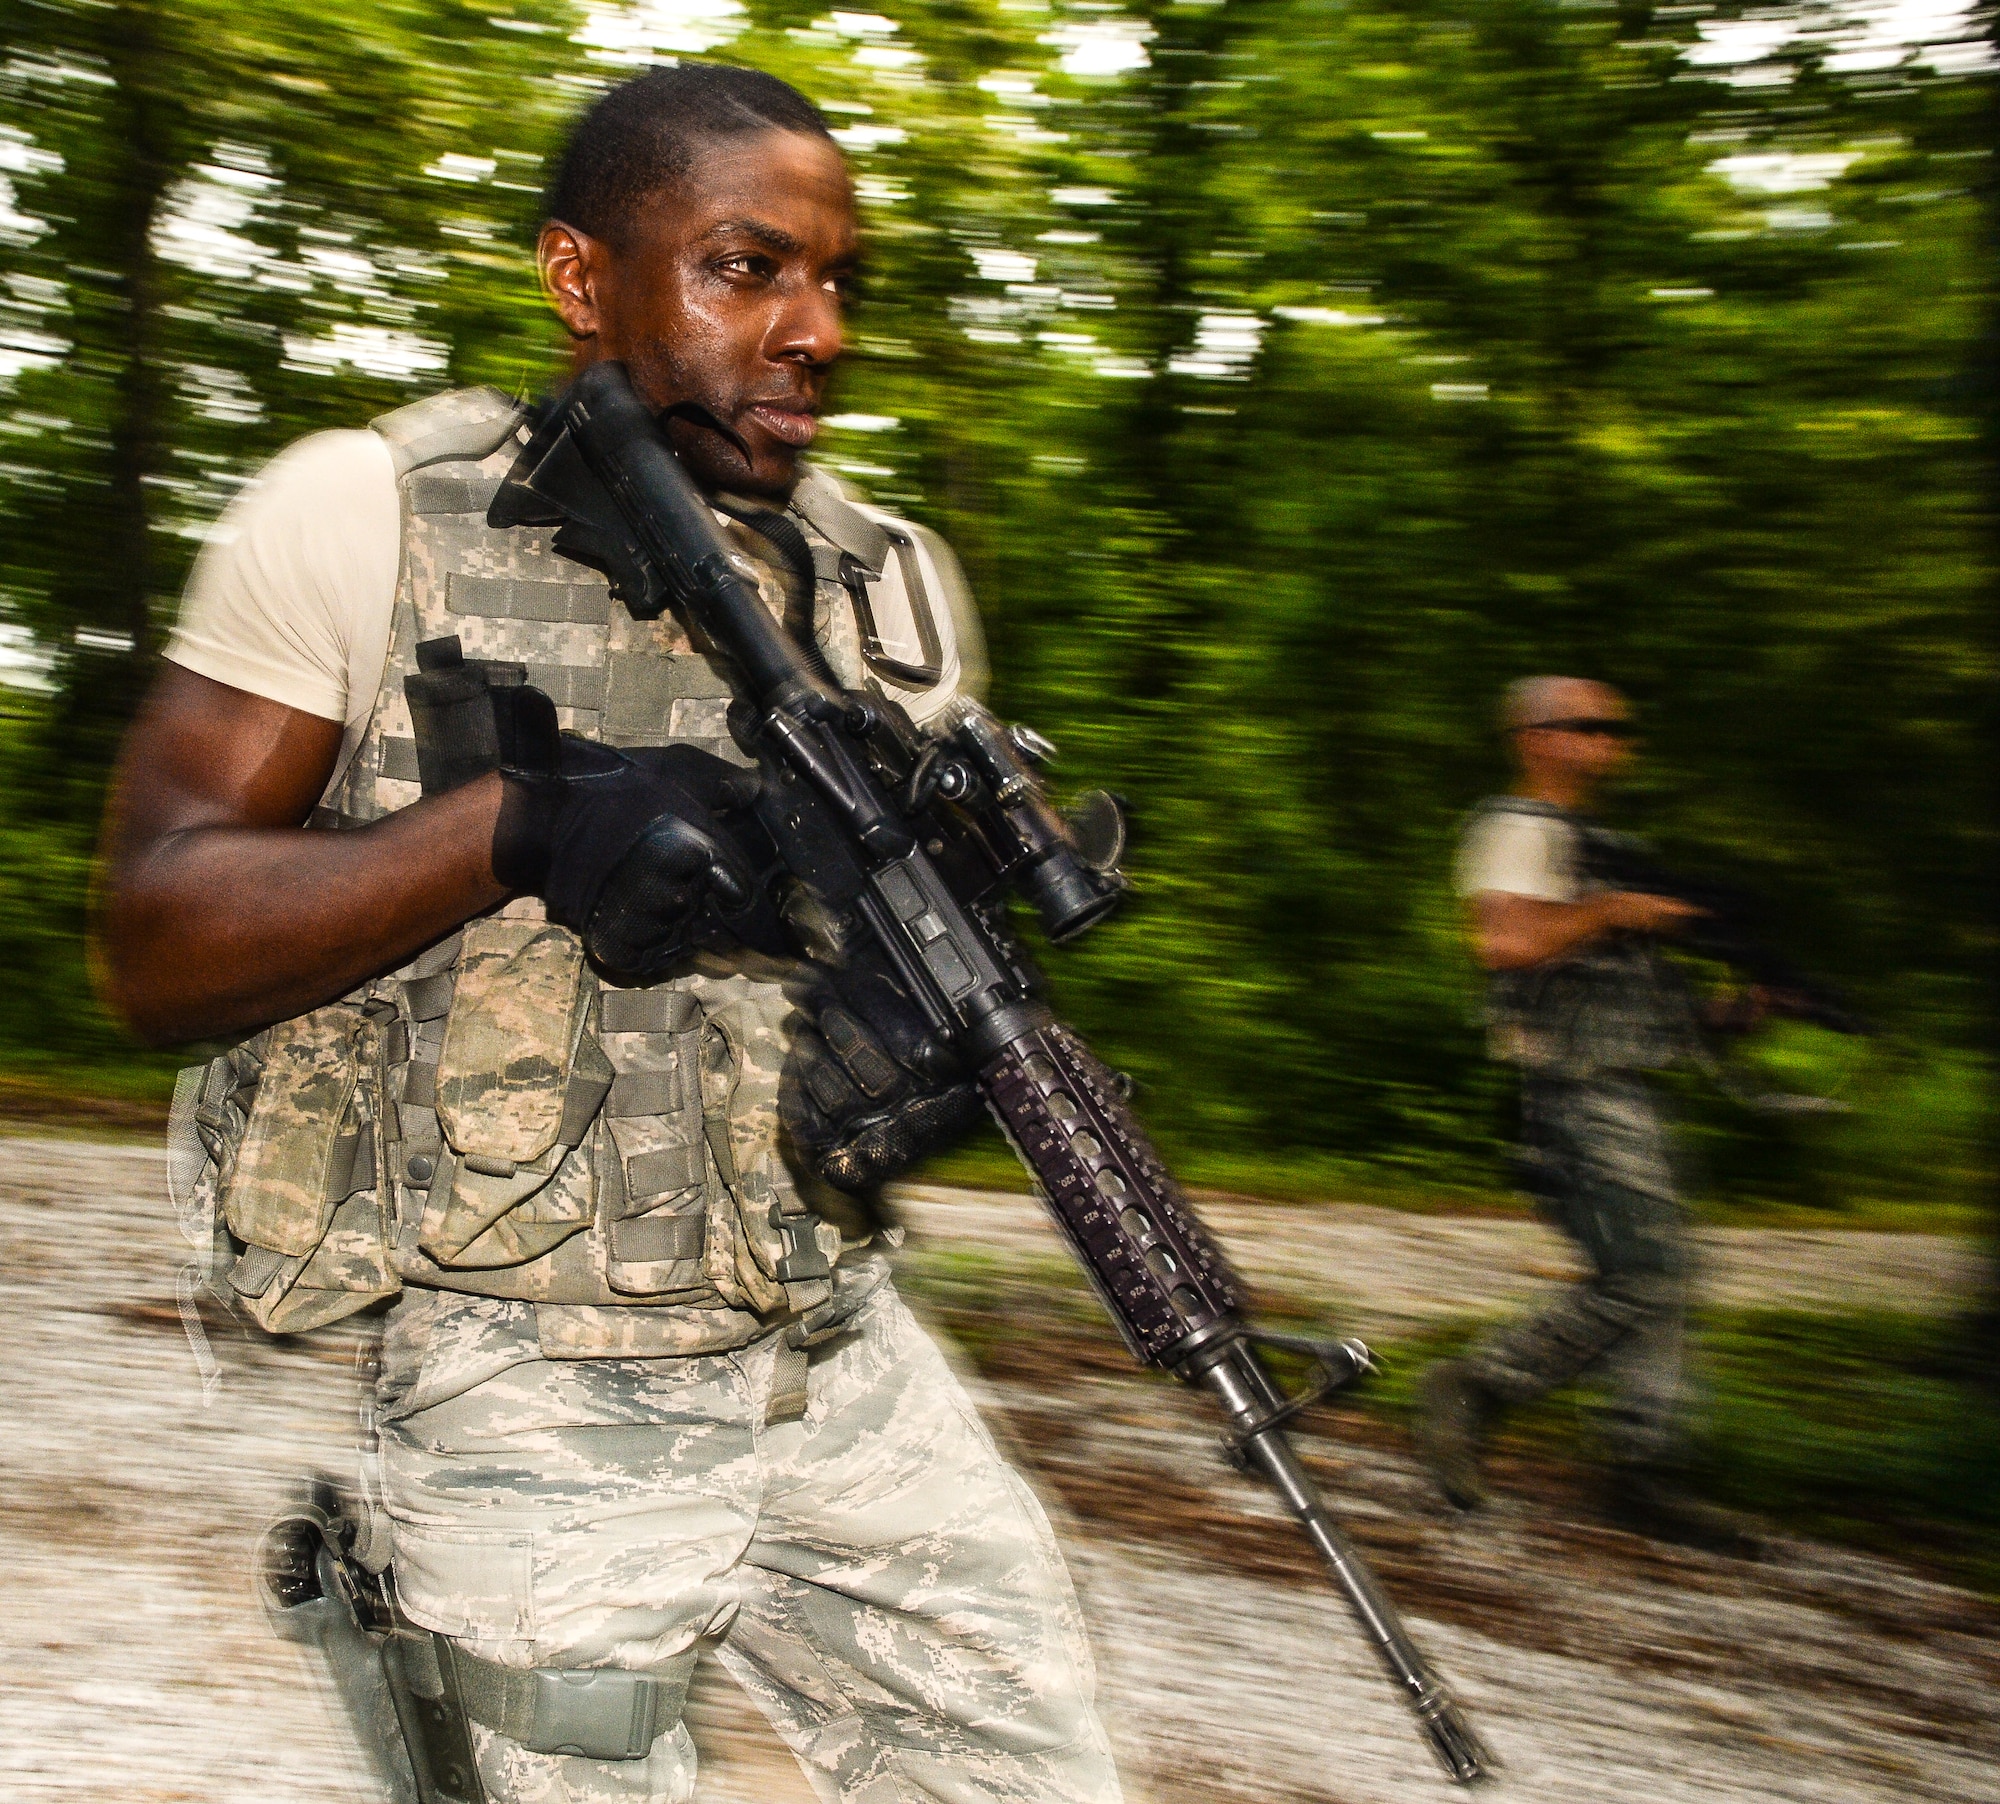 U.S. Air Force Senior Airman Fitzgerald Wiggleton, a member of the 116th Security Forces Squadron (SFS), Georgia Air National Guard, takes part in counterinsurgency operations, or COIN, training at the Catoosa Training Site, Tunnel Hill, Ga., June 29, 2014. The 116th SFS deployed to the Catoosa Training Site for annual training where they received extensive classroom and hands-on training to hone their skills on various firearms such as the M4 carbine, M203 grenade launcher and M240 and M249 machine guns as well as training in various security operations performed by Air Force security forces personnel. During COIN training, the Security Forces Airmen used a simulated local village to practice building breaching and clearing operations as well as working with the local populace while encountering simulated threats. (U.S. Air National Guard photo by Master Sgt. Roger Parsons/Released)